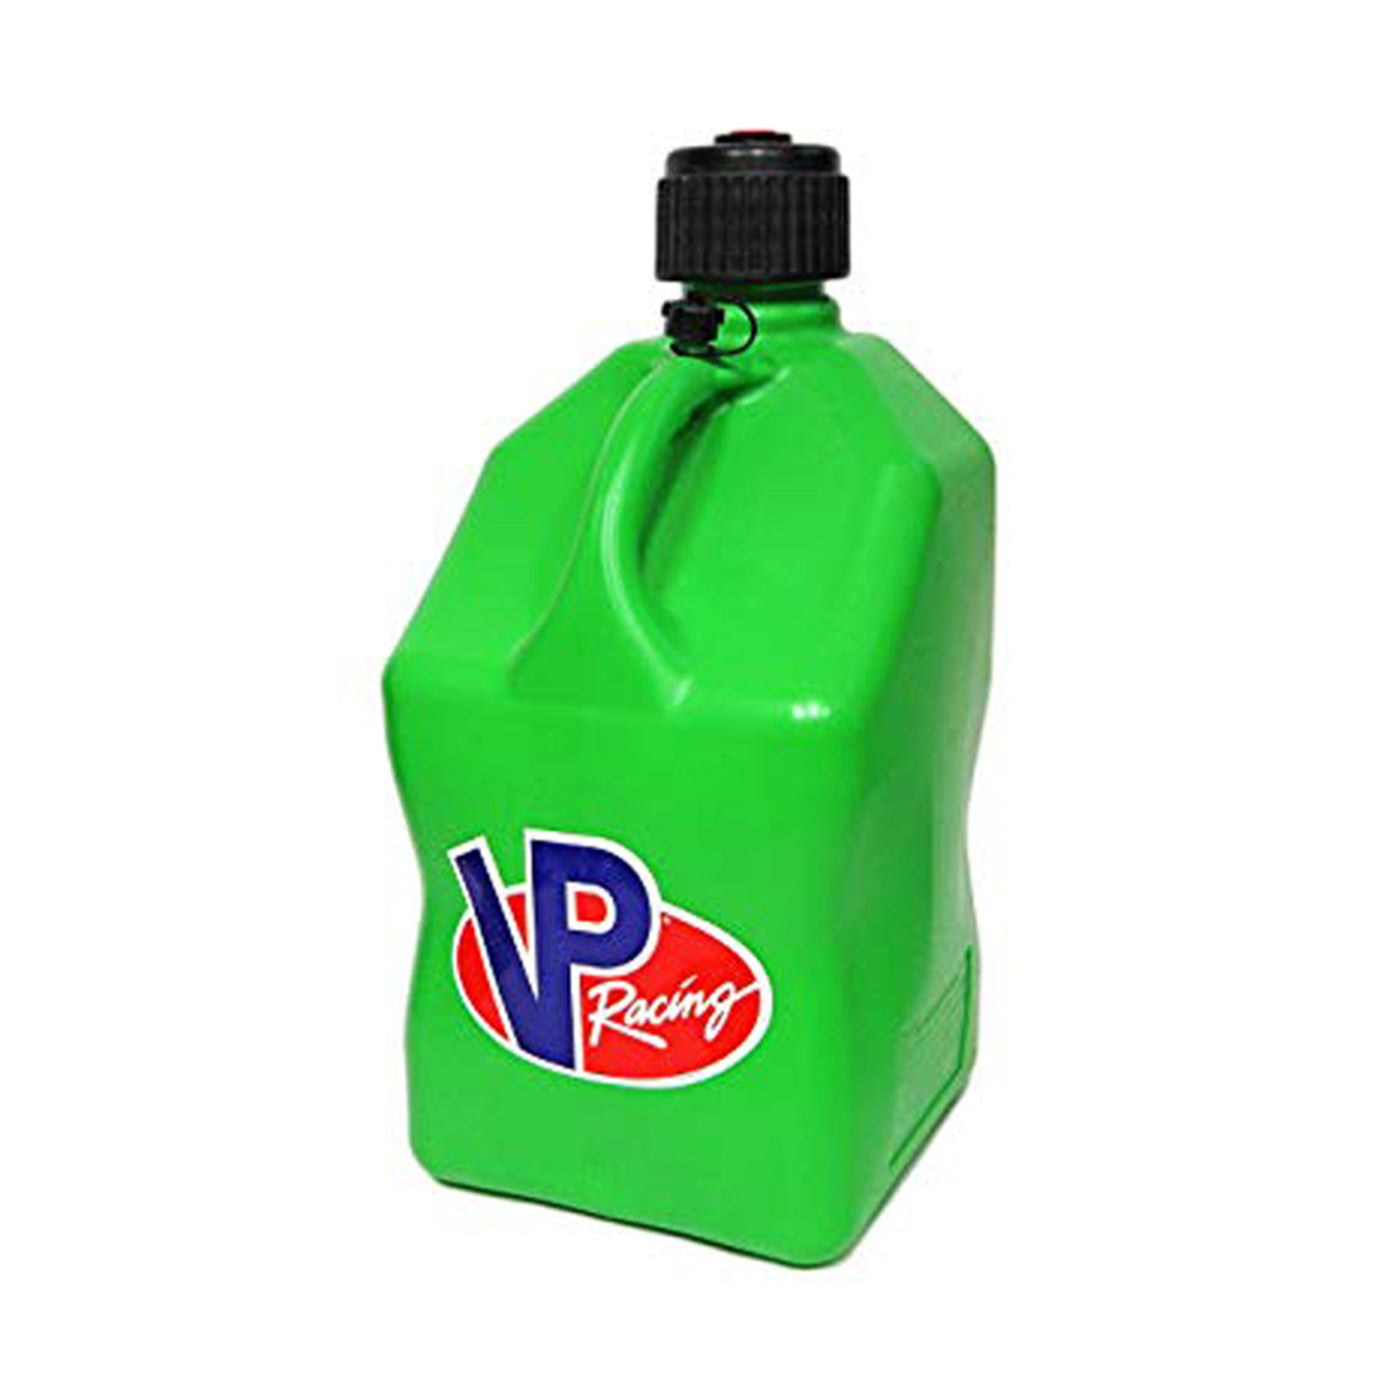 Vp Racing Fuels 3562 5-Gallon Container Green #3562